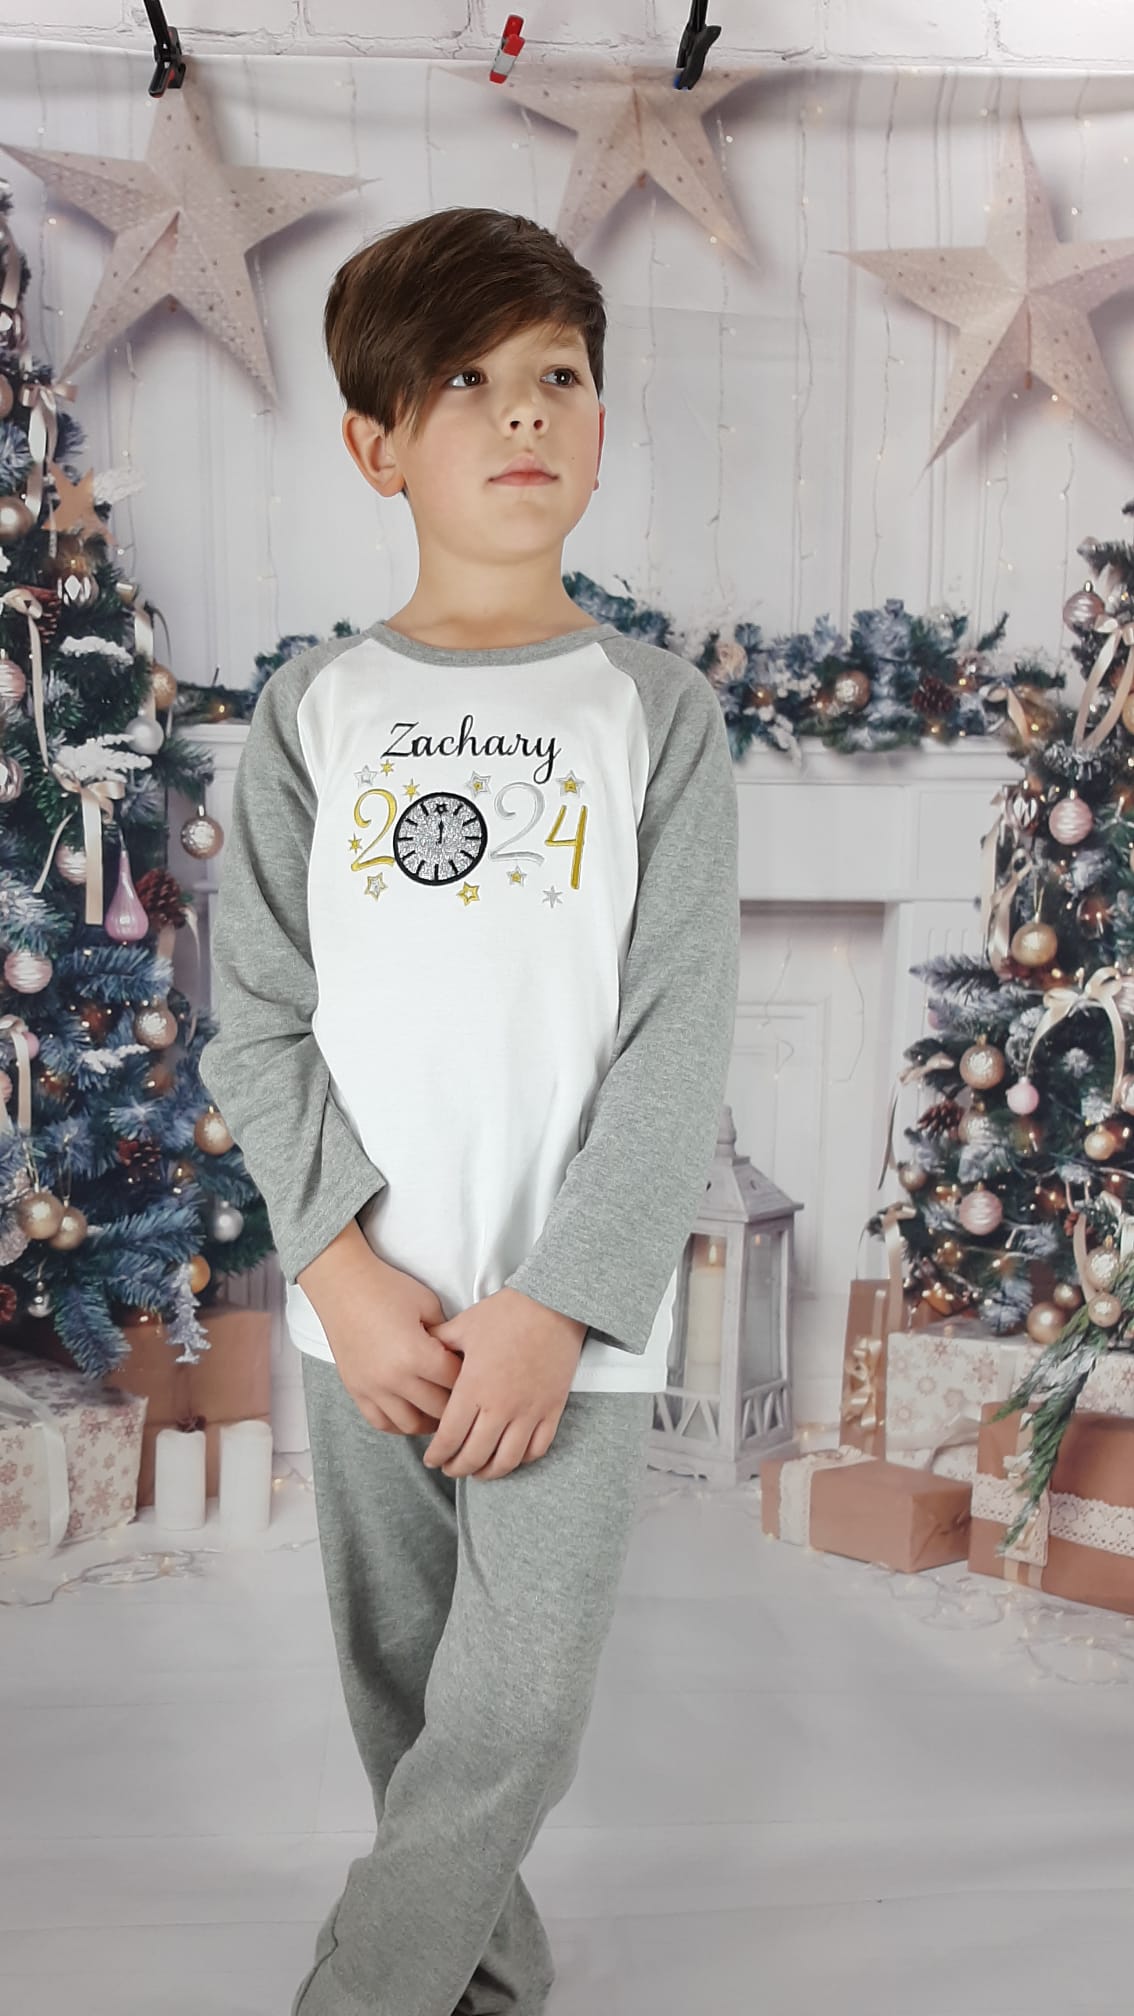 New Years Eve Sparkly Pjs embroidered personalisation with glitter modelled by a boy but suitable for a girl stood